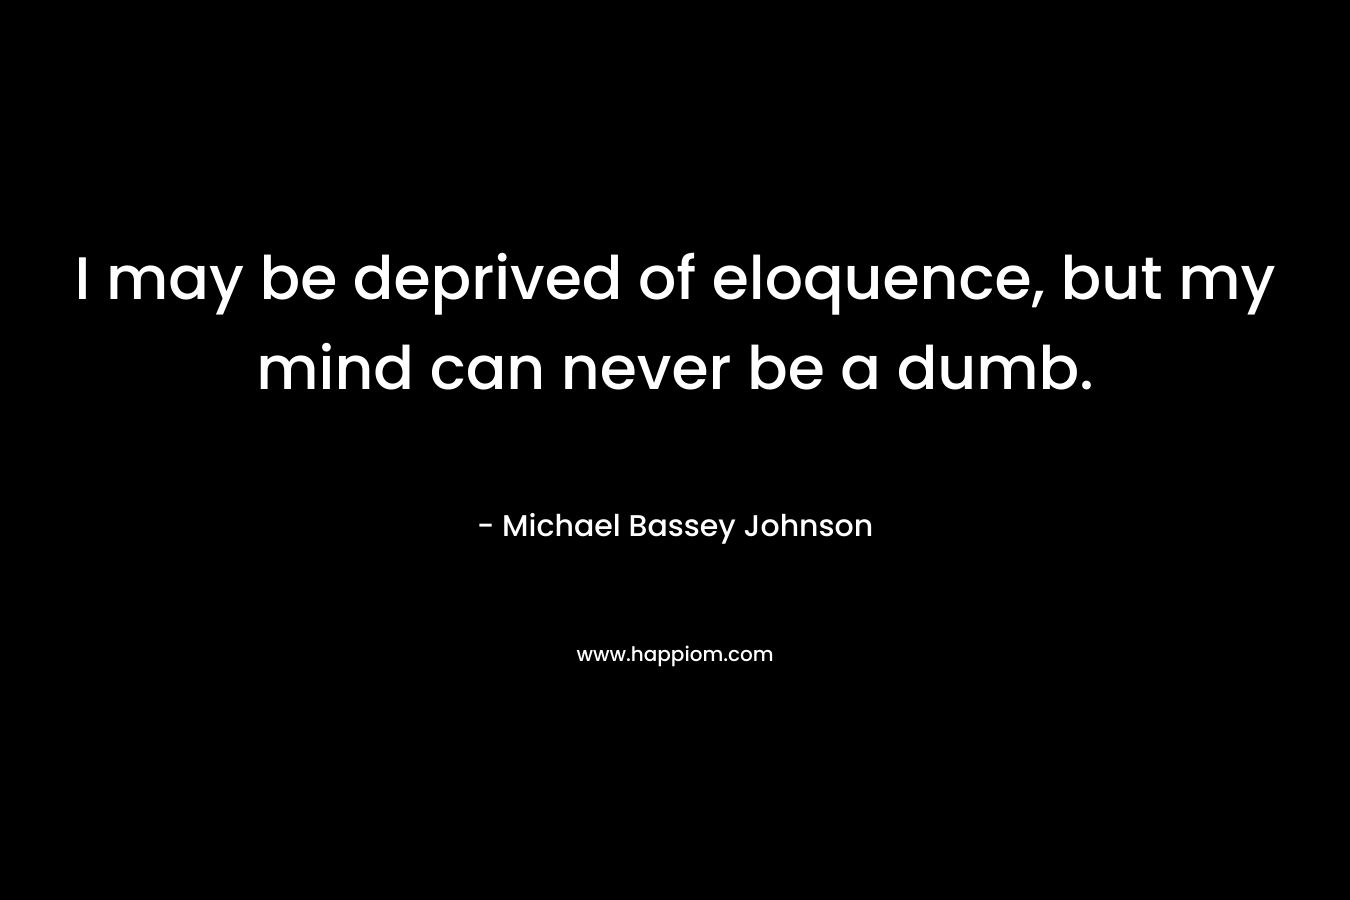 I may be deprived of eloquence, but my mind can never be a dumb. – Michael Bassey Johnson